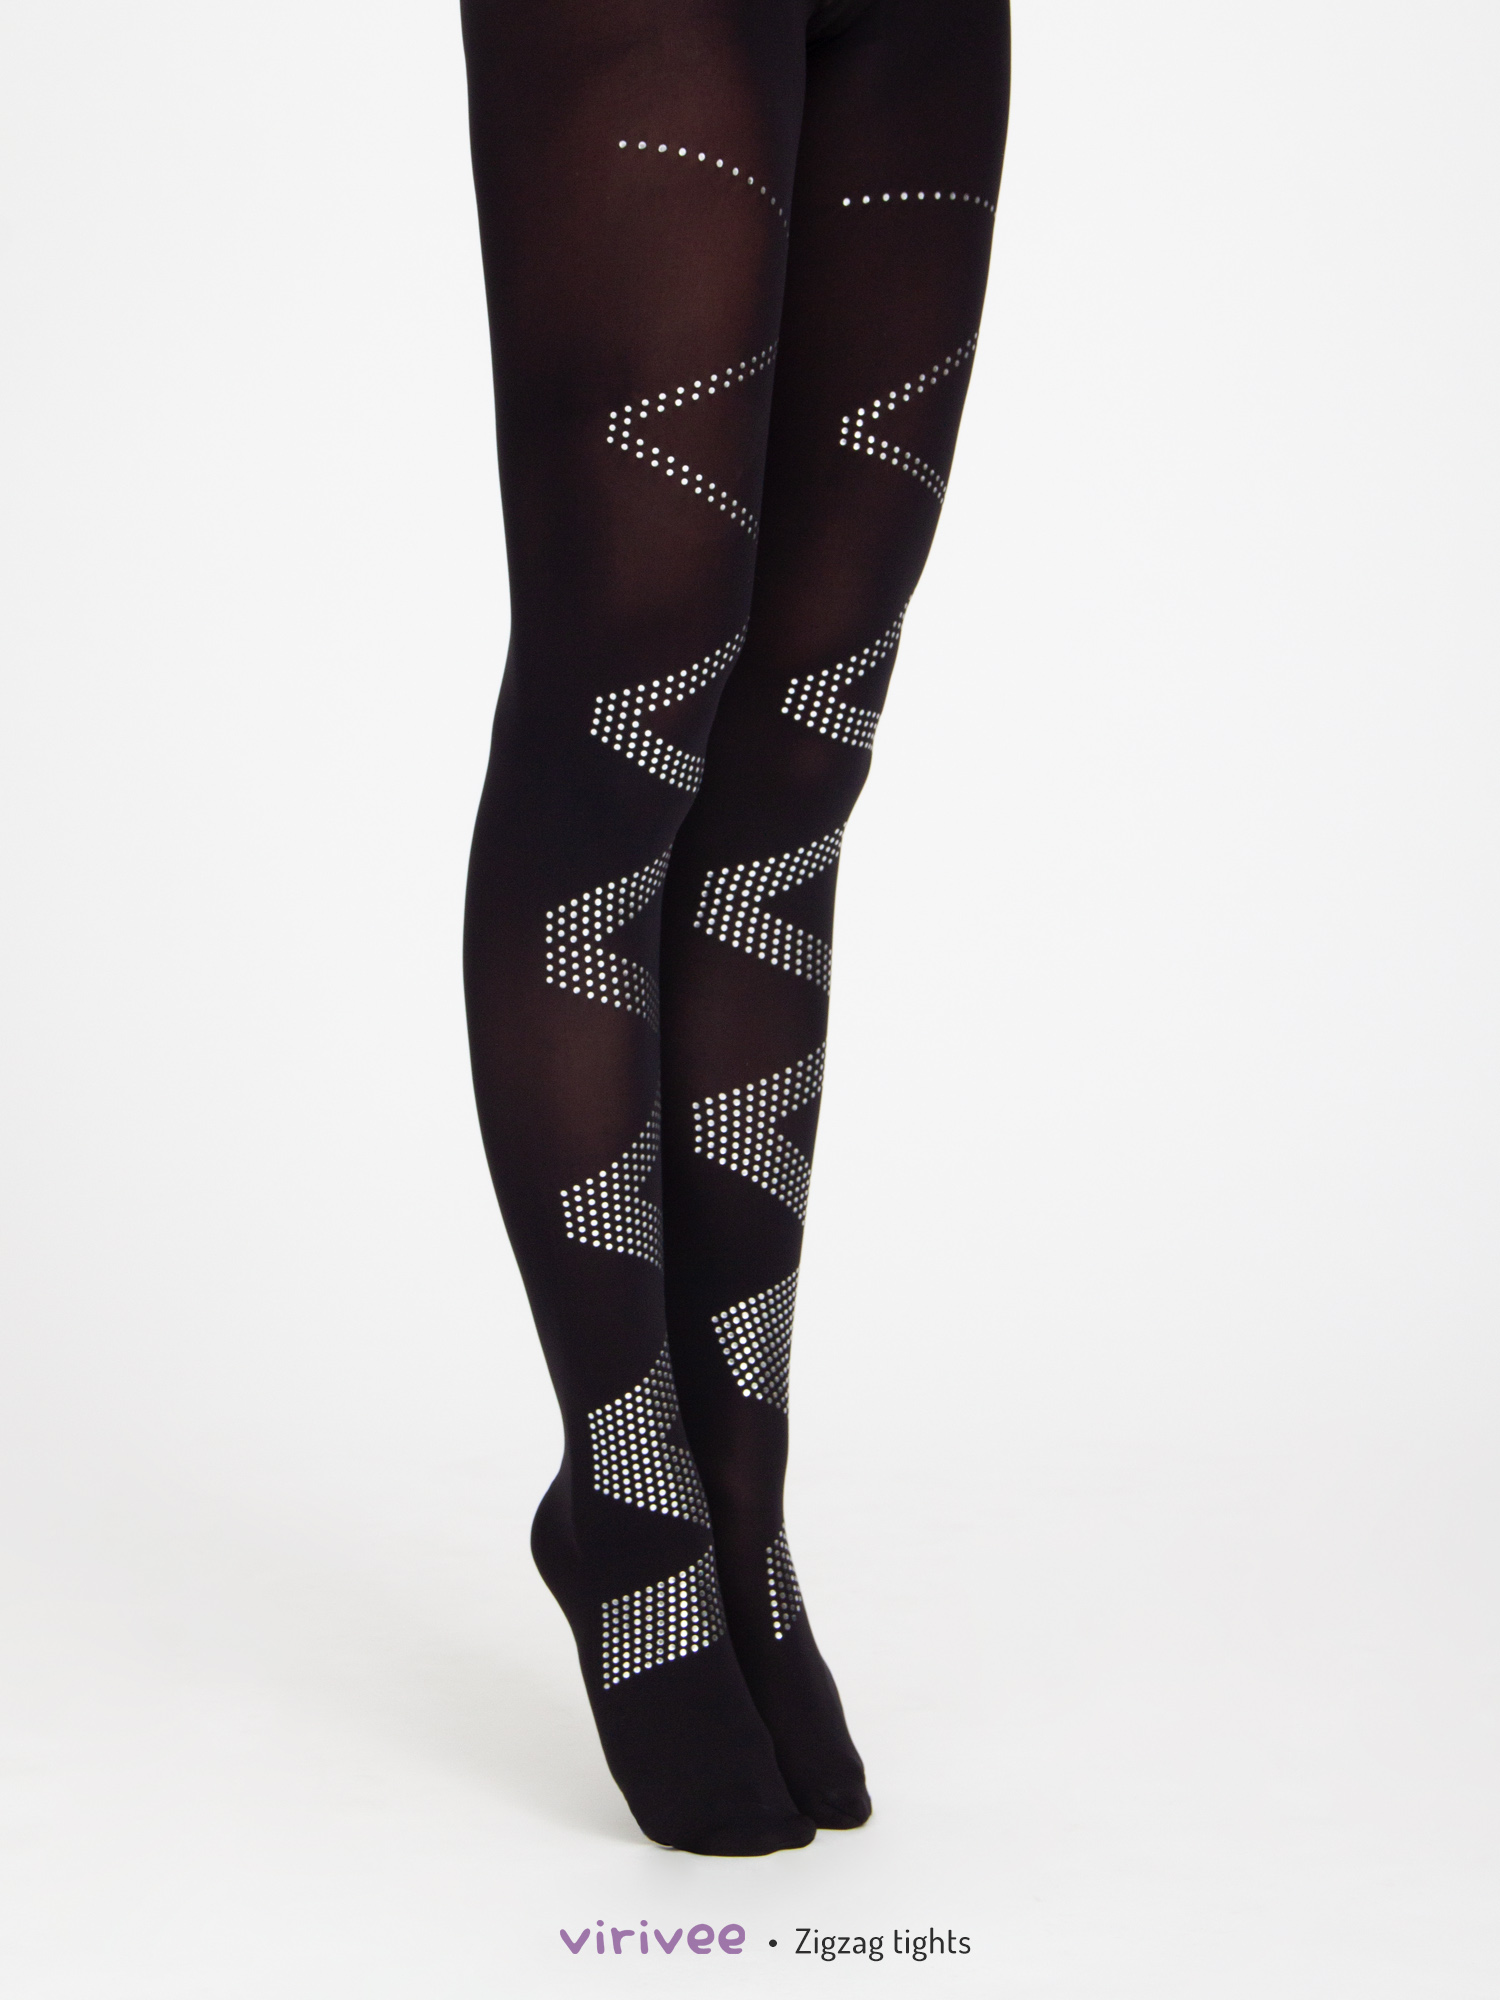 Silver zigzag tights - Virivee Tights - Unique tights designed and made ...